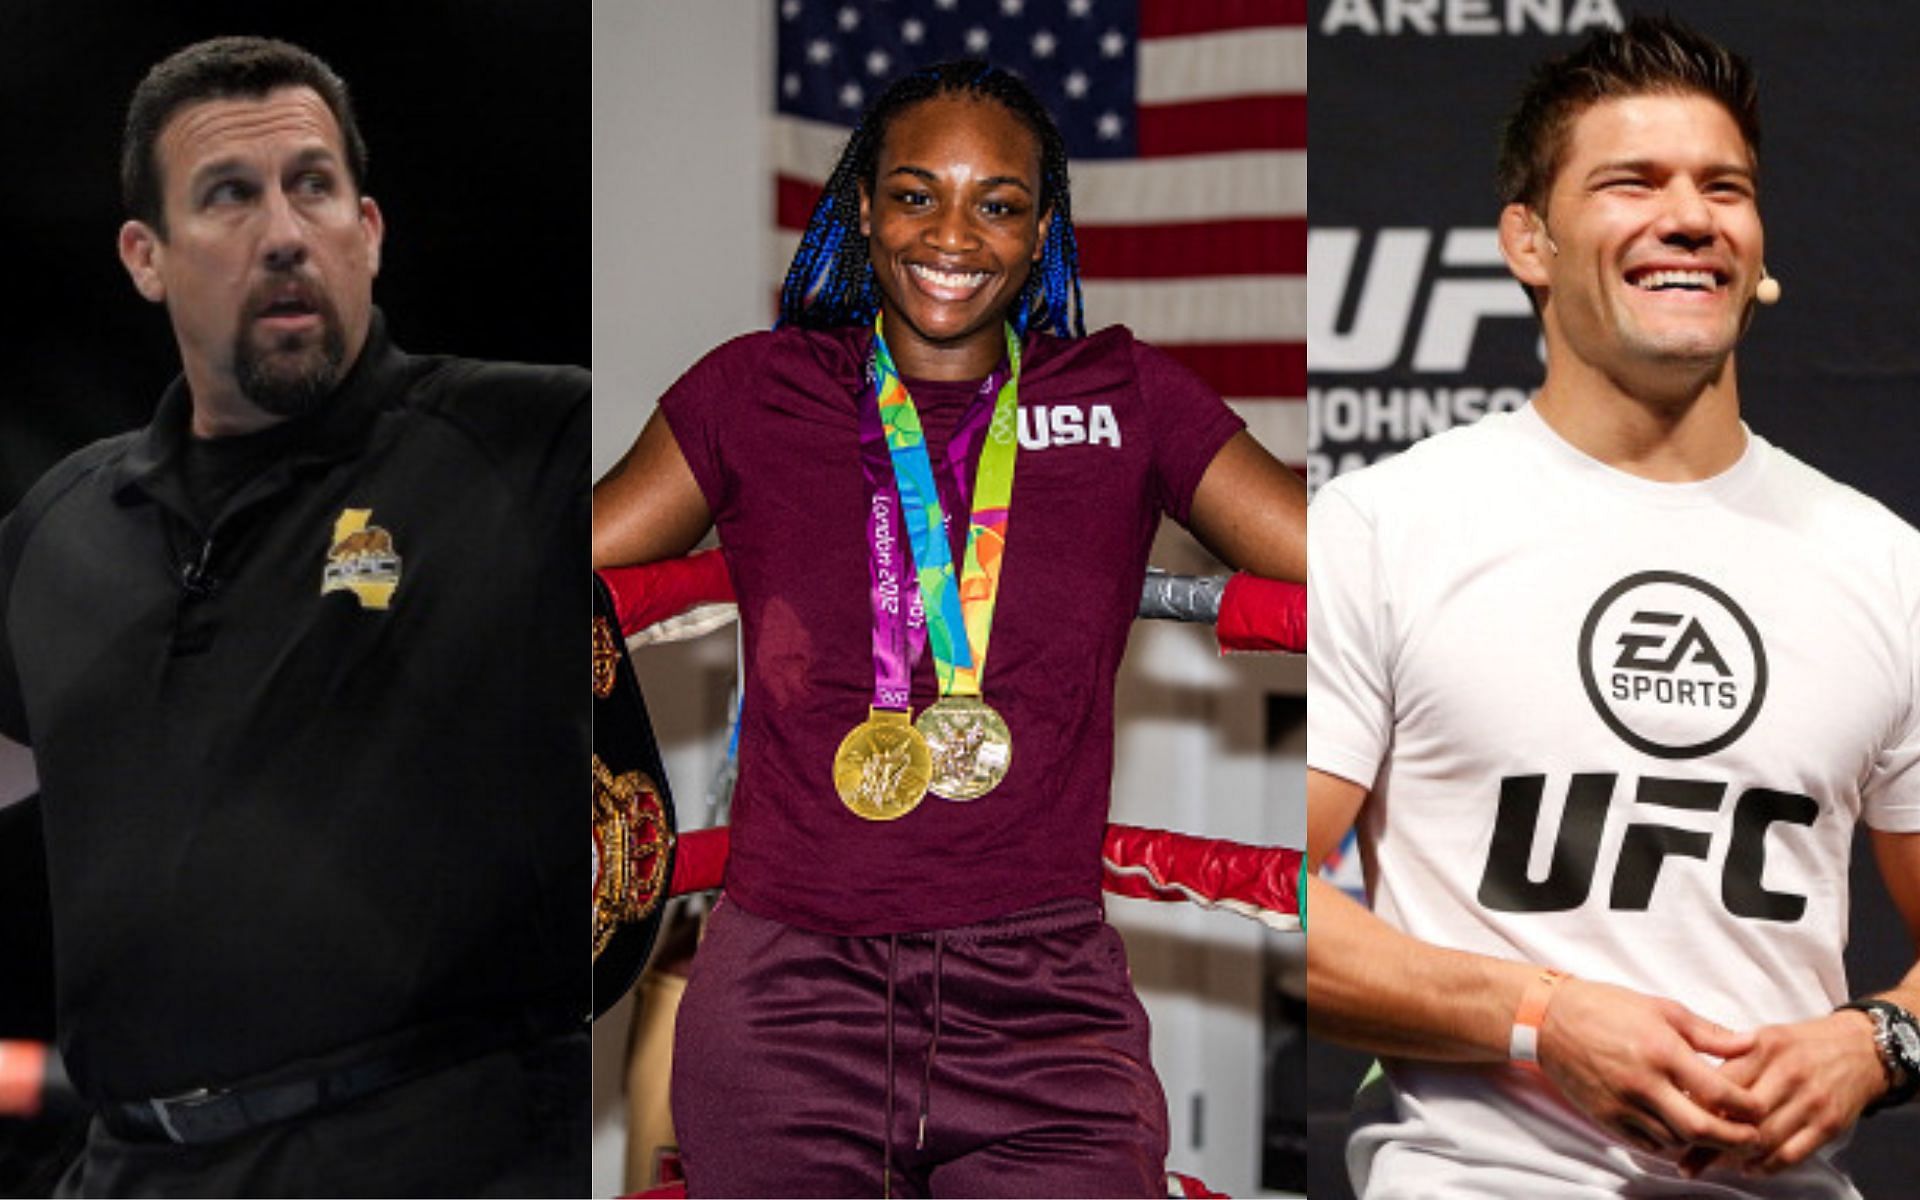 John McCarthy (left), Claressa Shields (middle), and Josh Thomson (right)(Images via Getty)